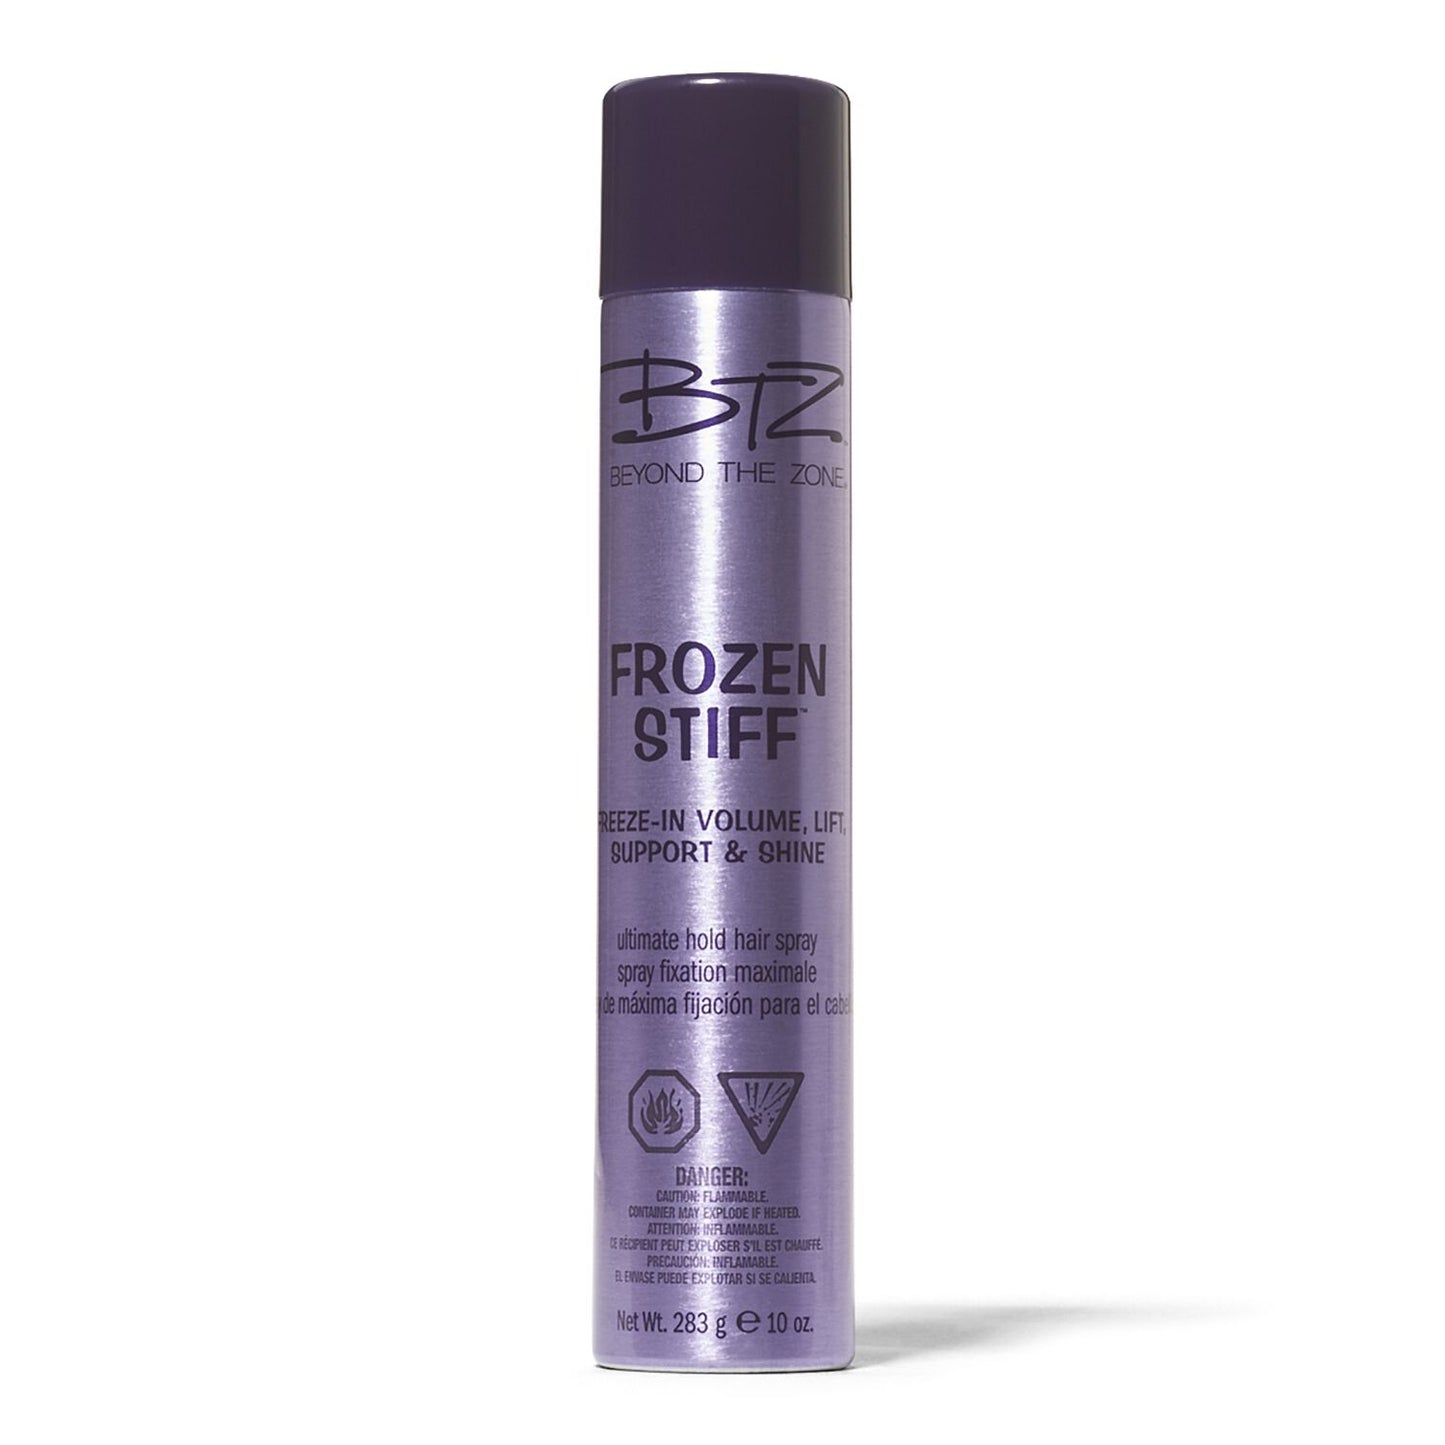 Beyond the Zone Ultimate Hold Hair Spray